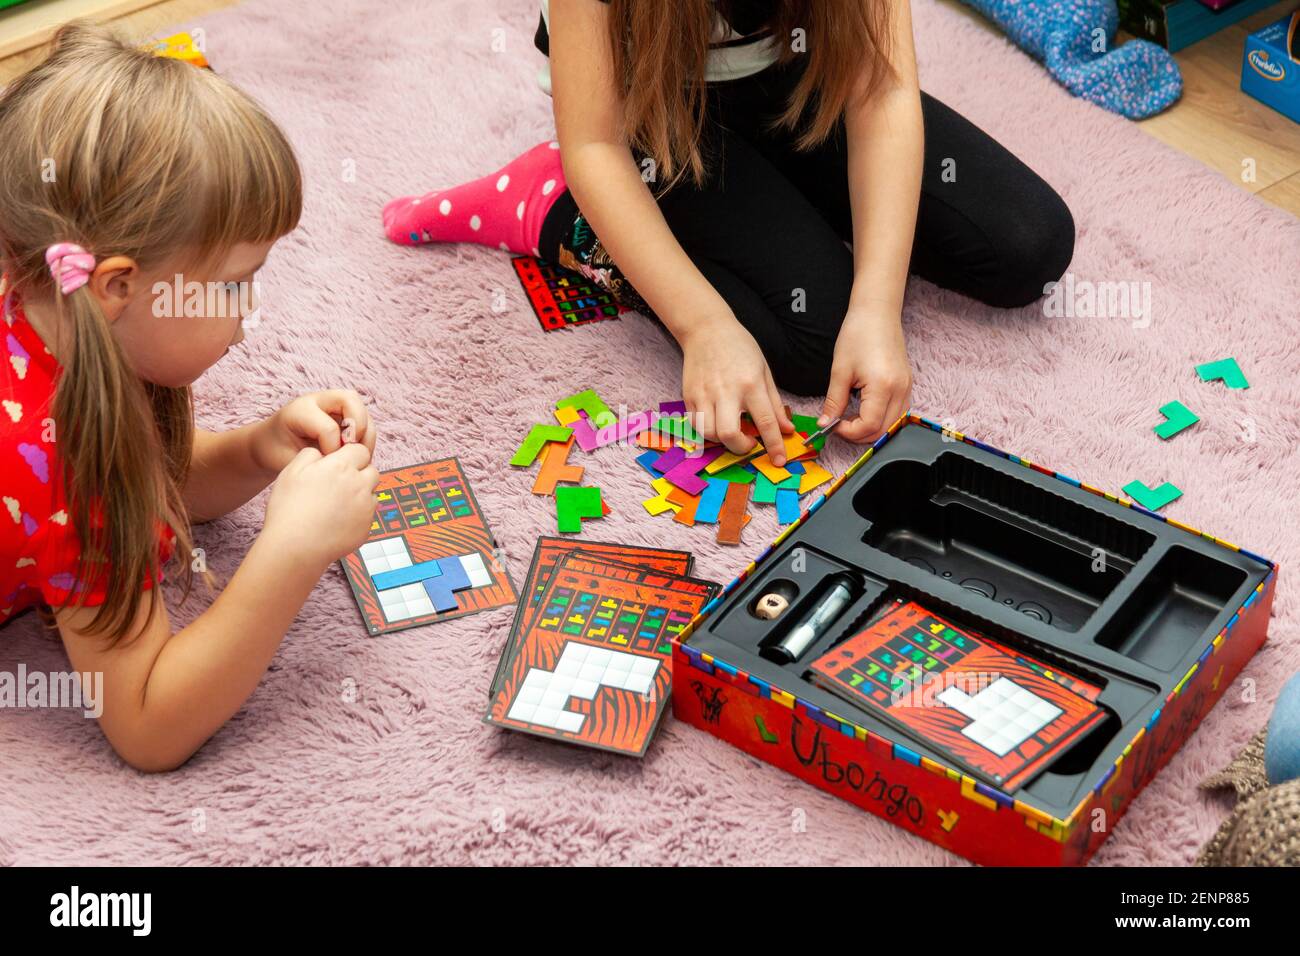 110+ Fun Games To Play With Siblings